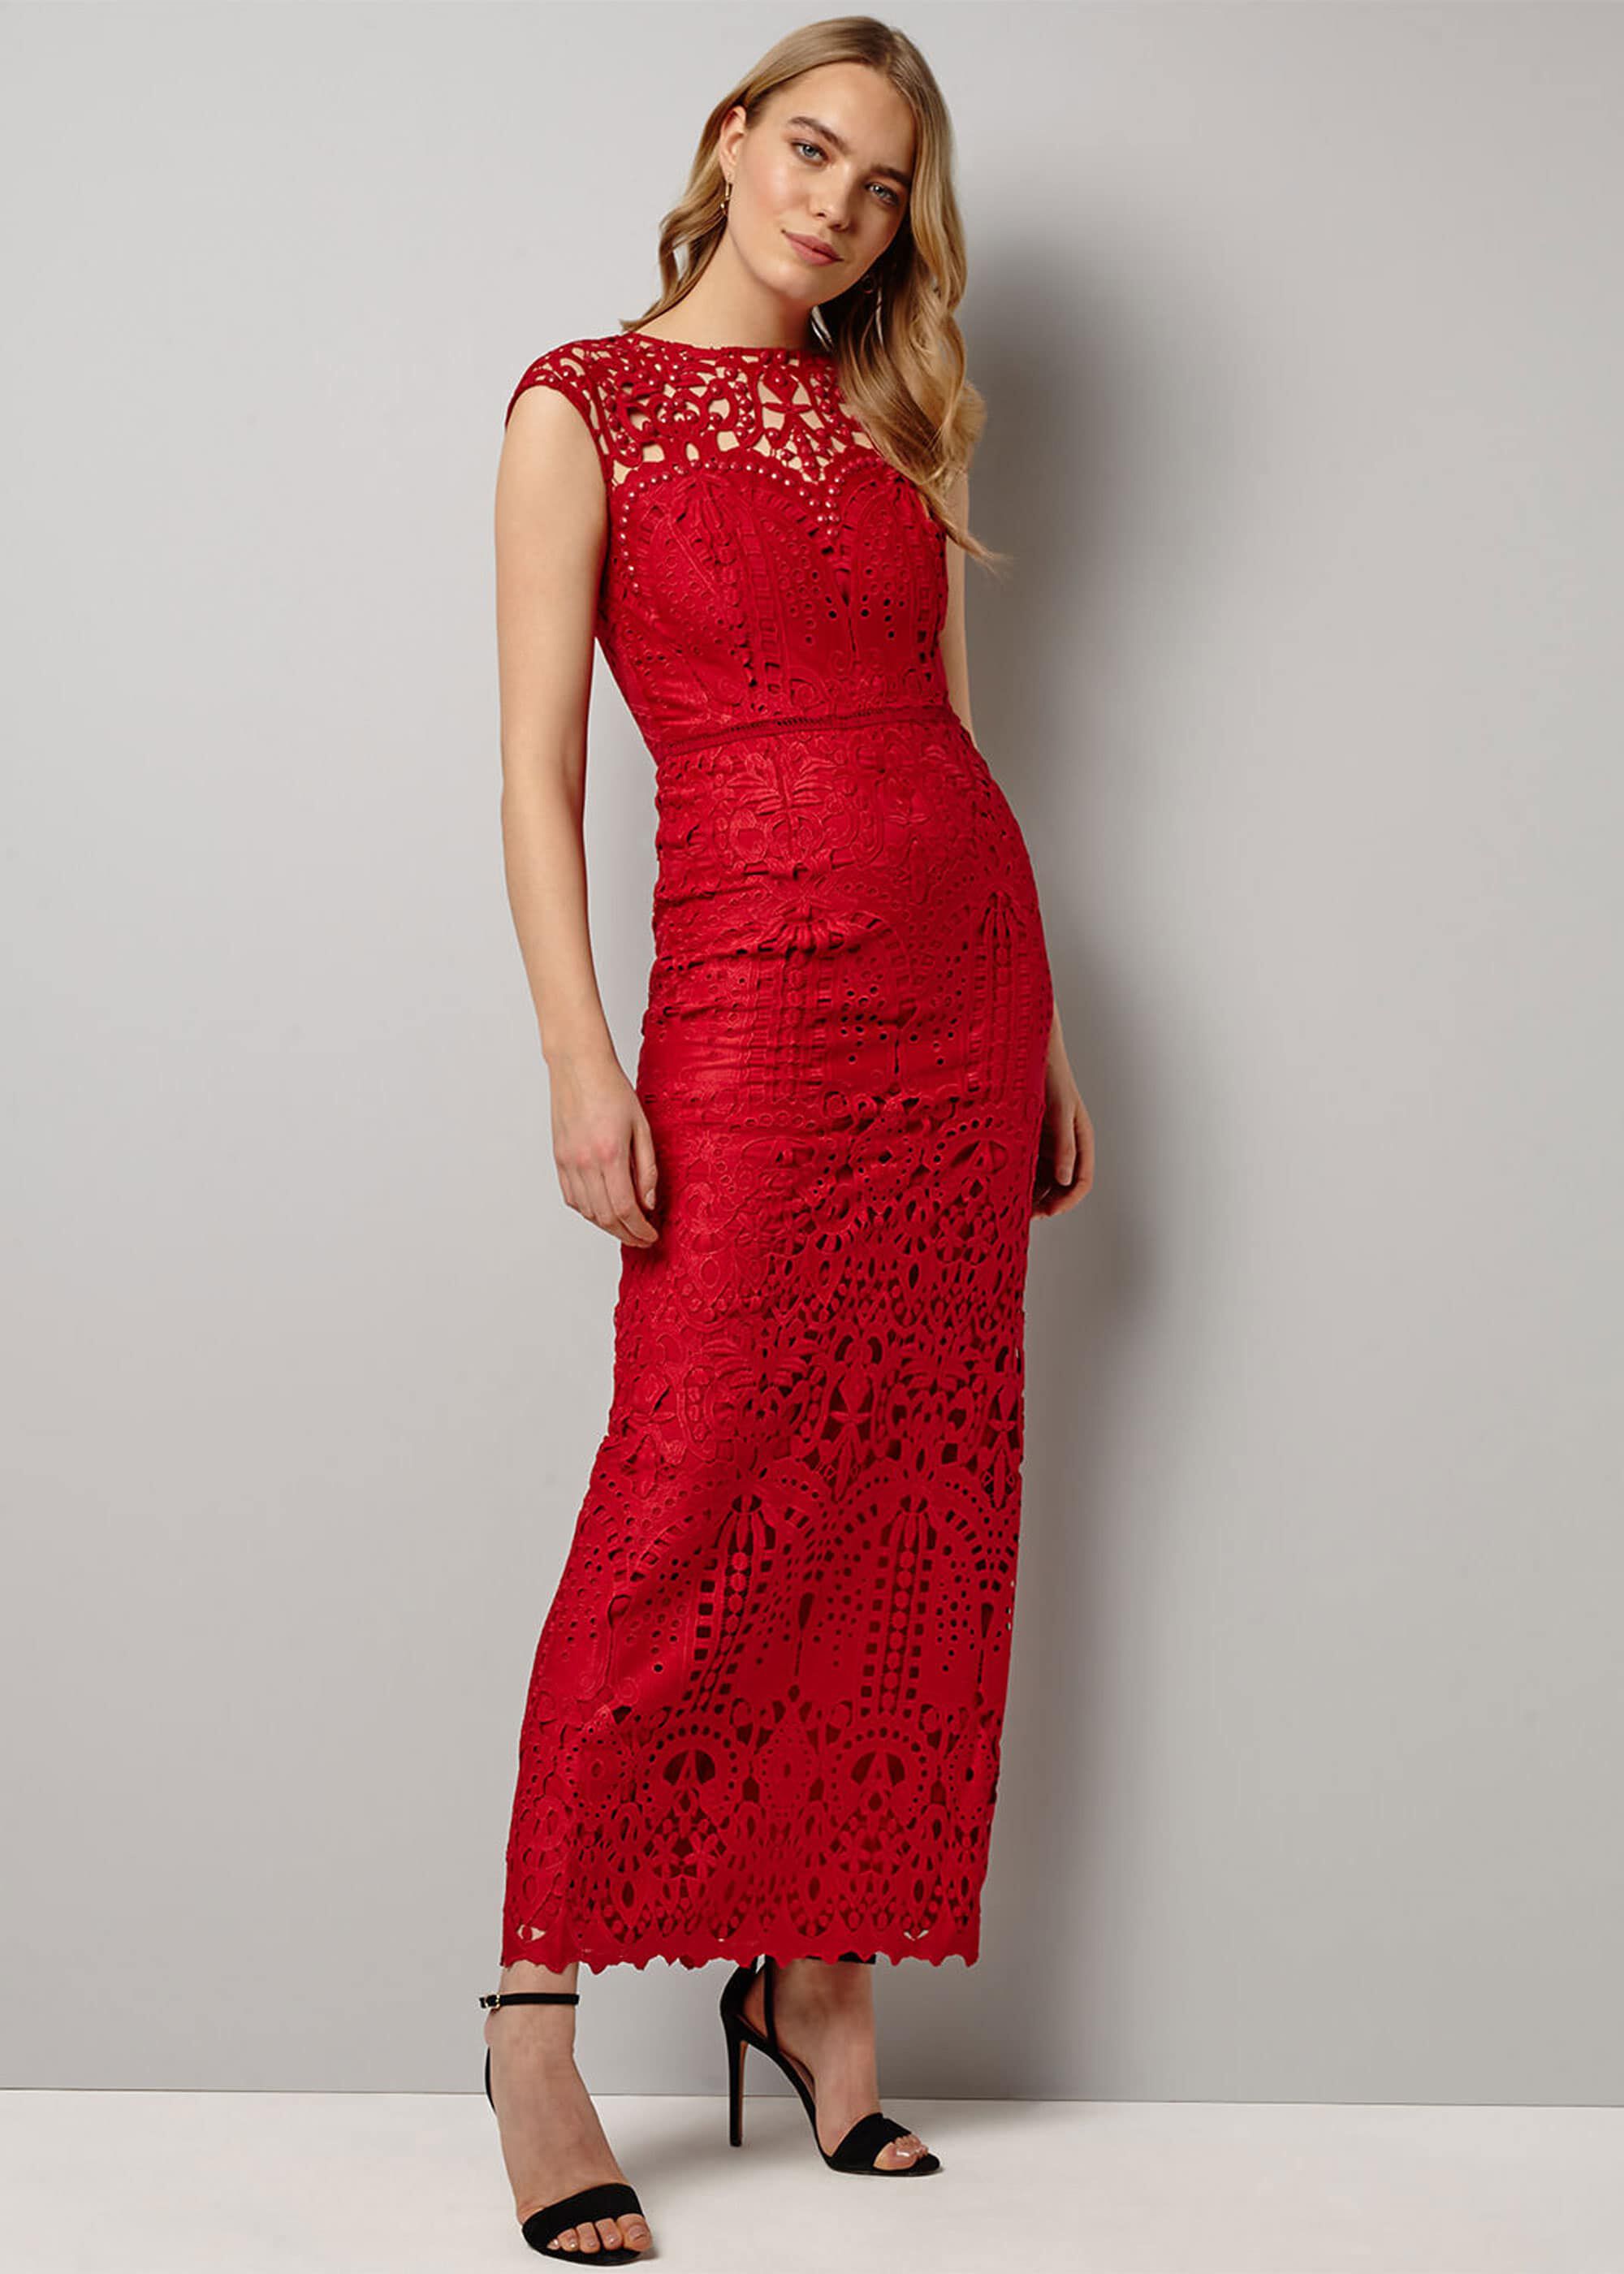 Phase Eight Long Dress Flash Sales, 52% OFF | www.emanagreen.com